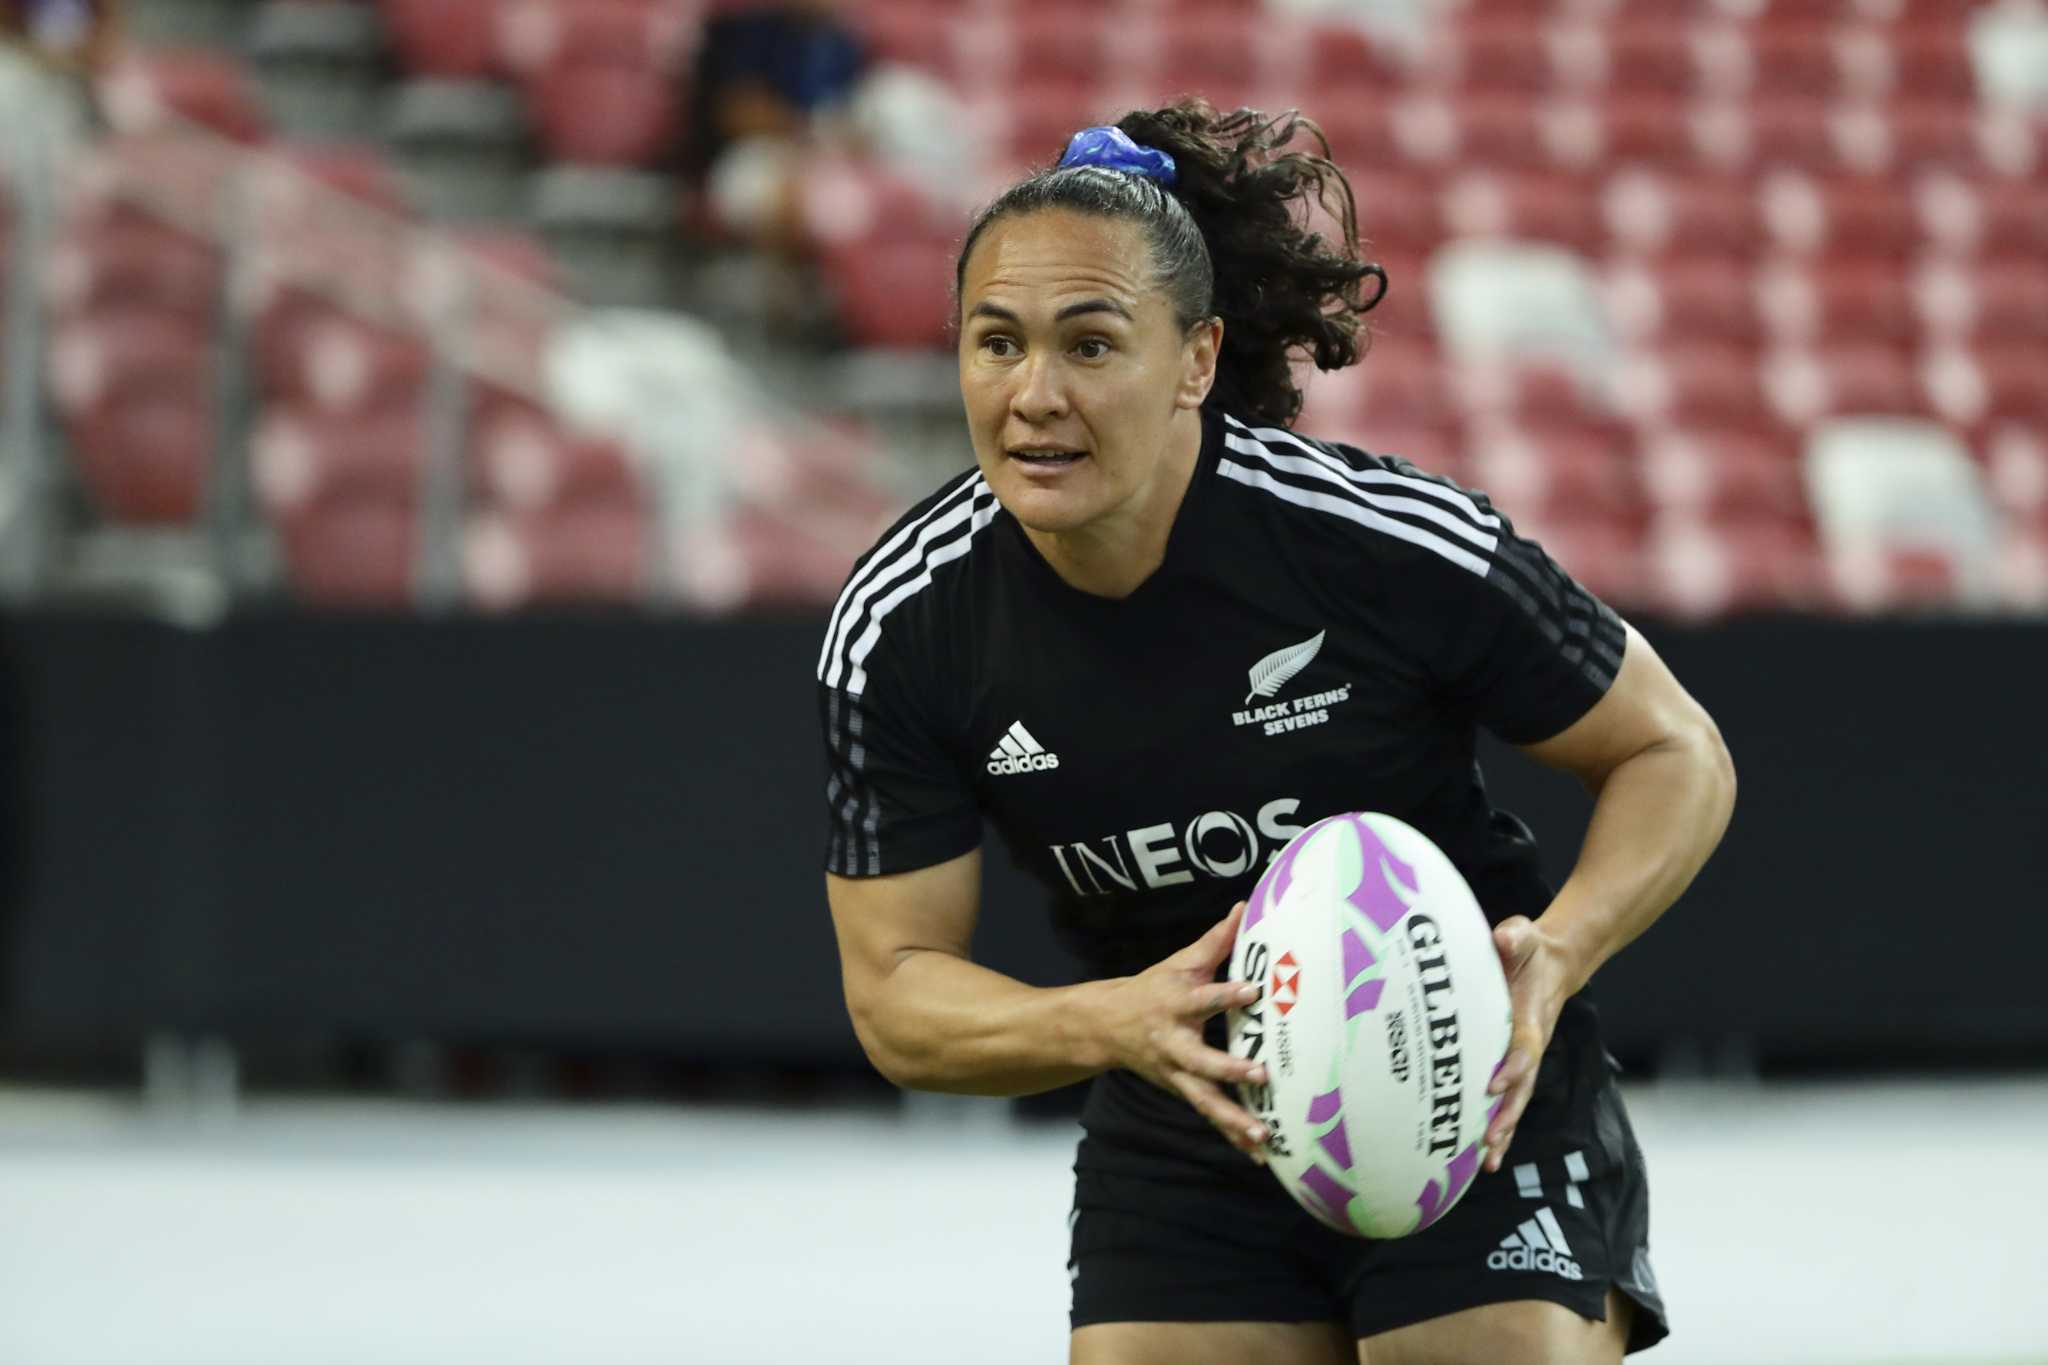 Woodman-Wickliffe eyes another Olympic gold in women's rugby, loves the Jonah Lomu comparisons